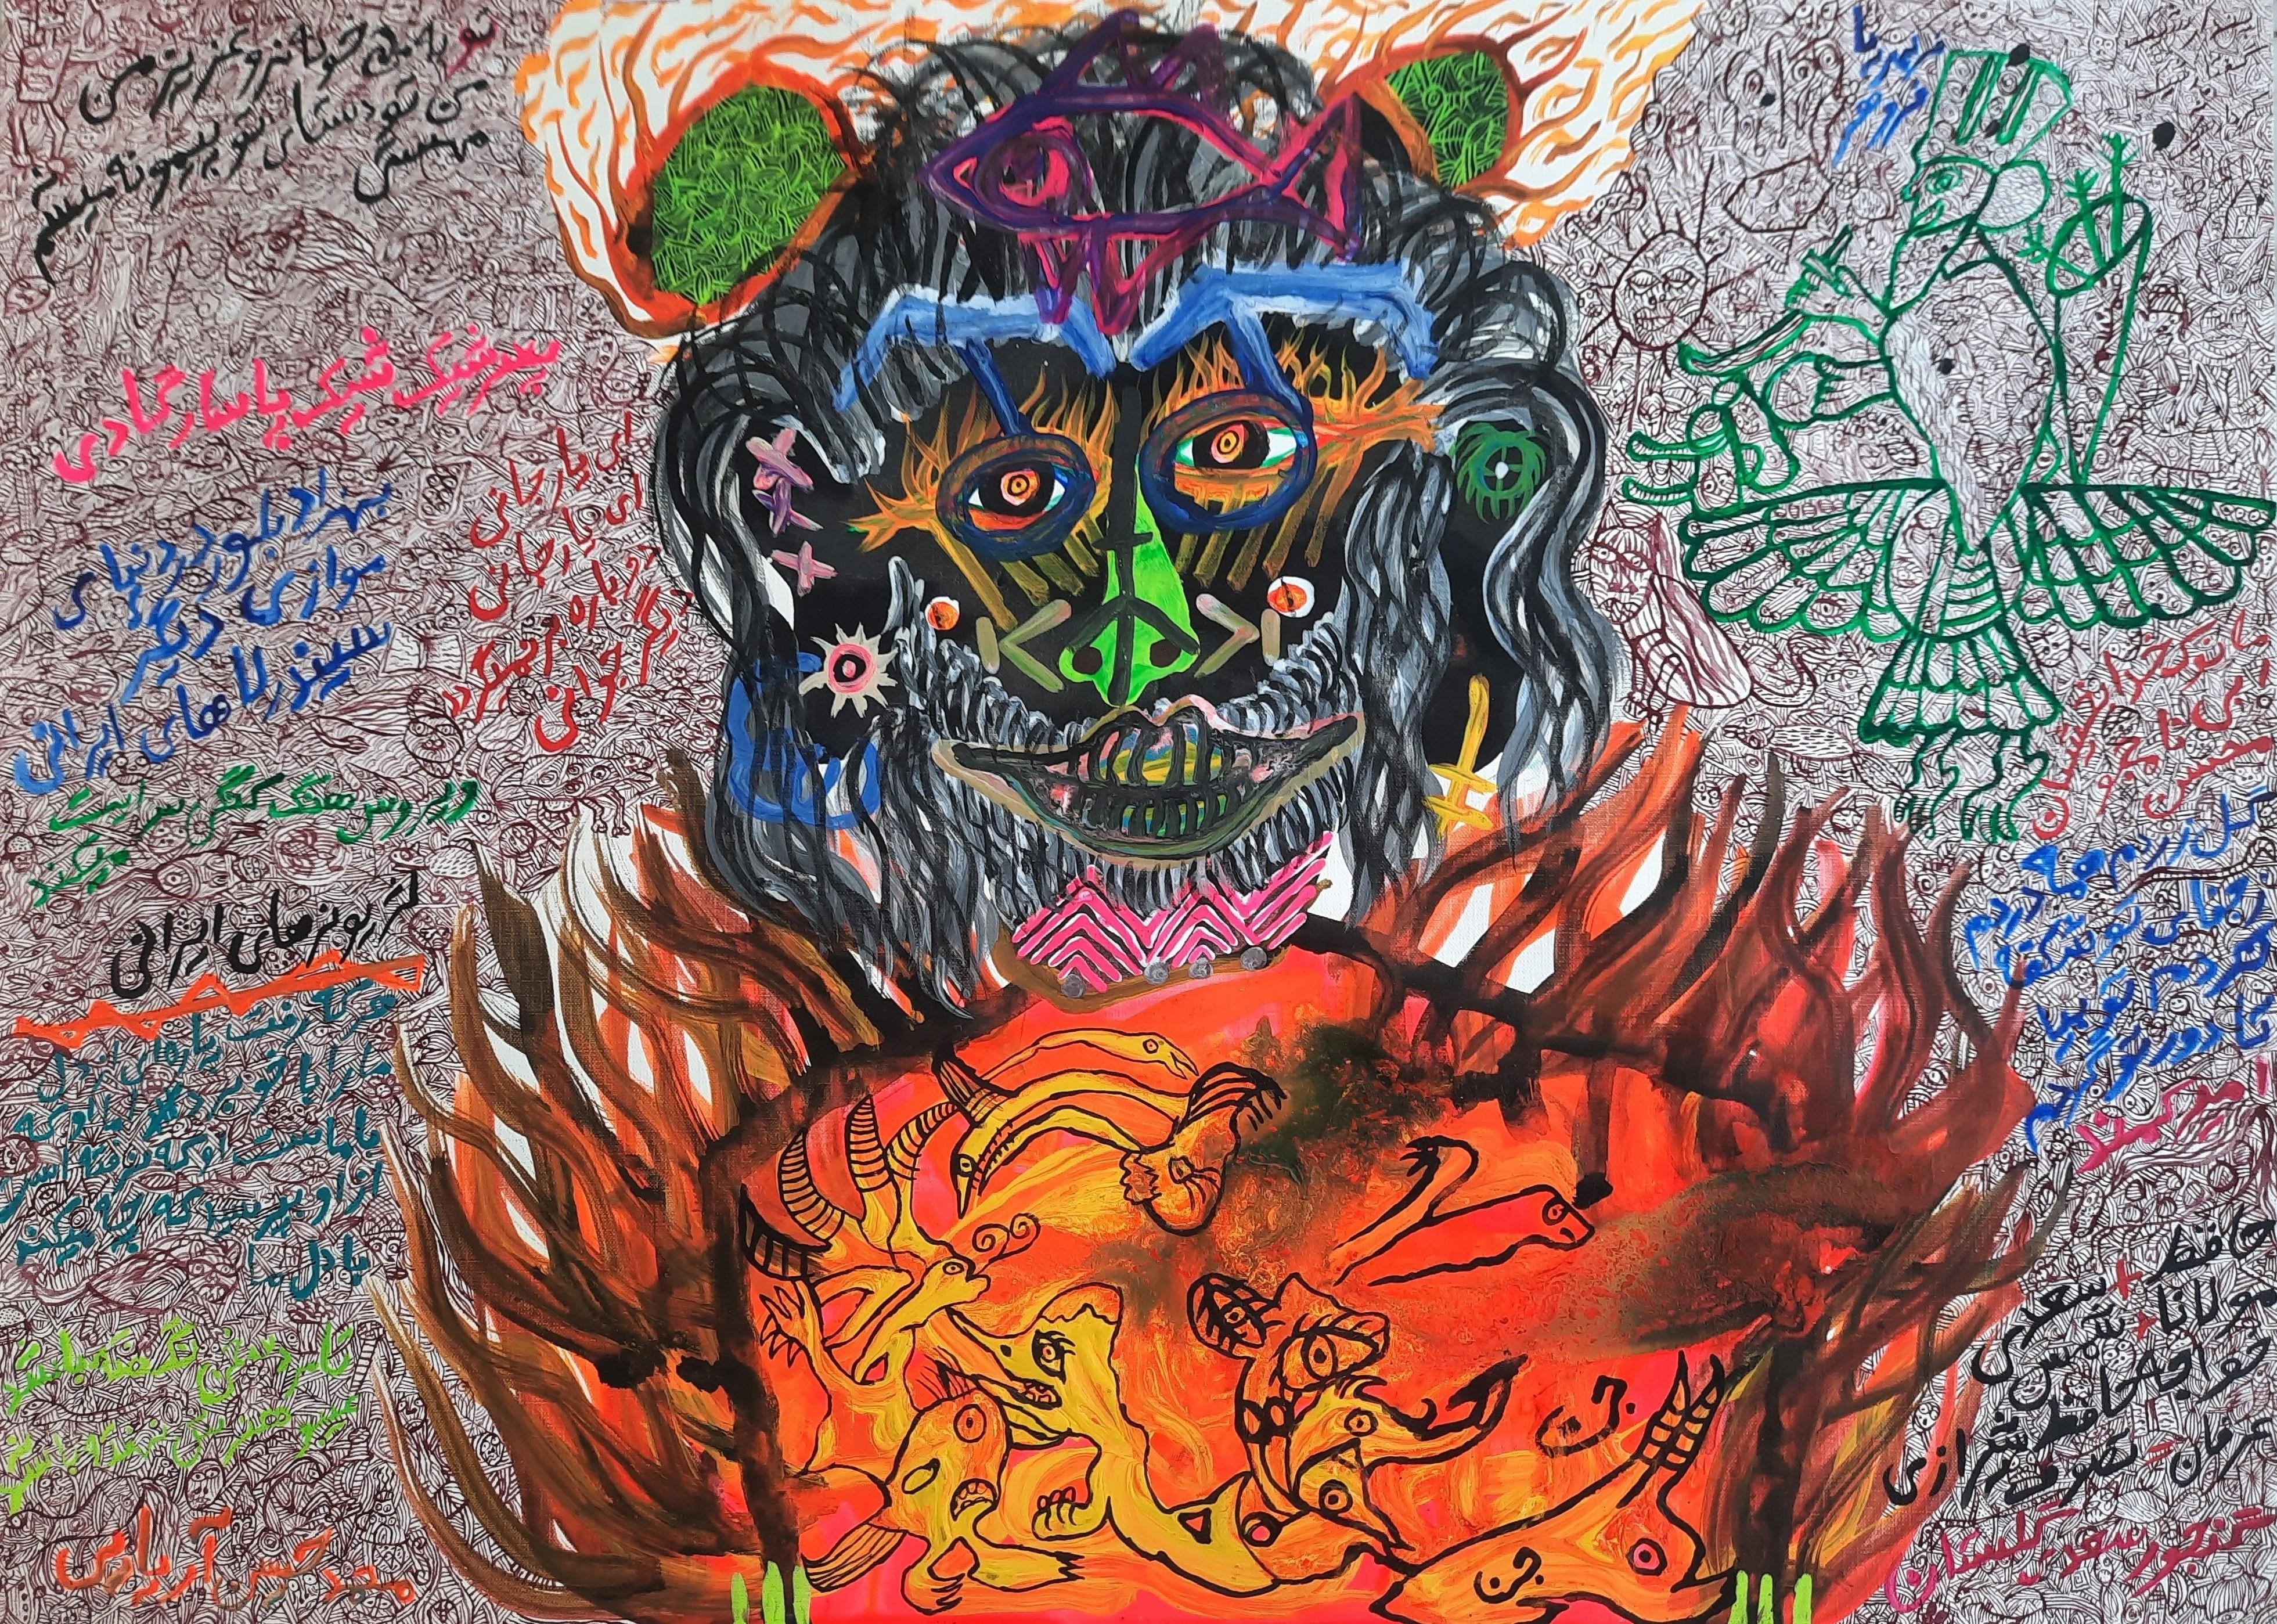 Acrylic paint on paper
Hand-signed lower left

« Here the barbaric or savage ceremonies of New Guinea take on the air of Rio carnival.
Here the vitality bursts and the colors dance the jig while thundering.
A charivari of African masks, children's